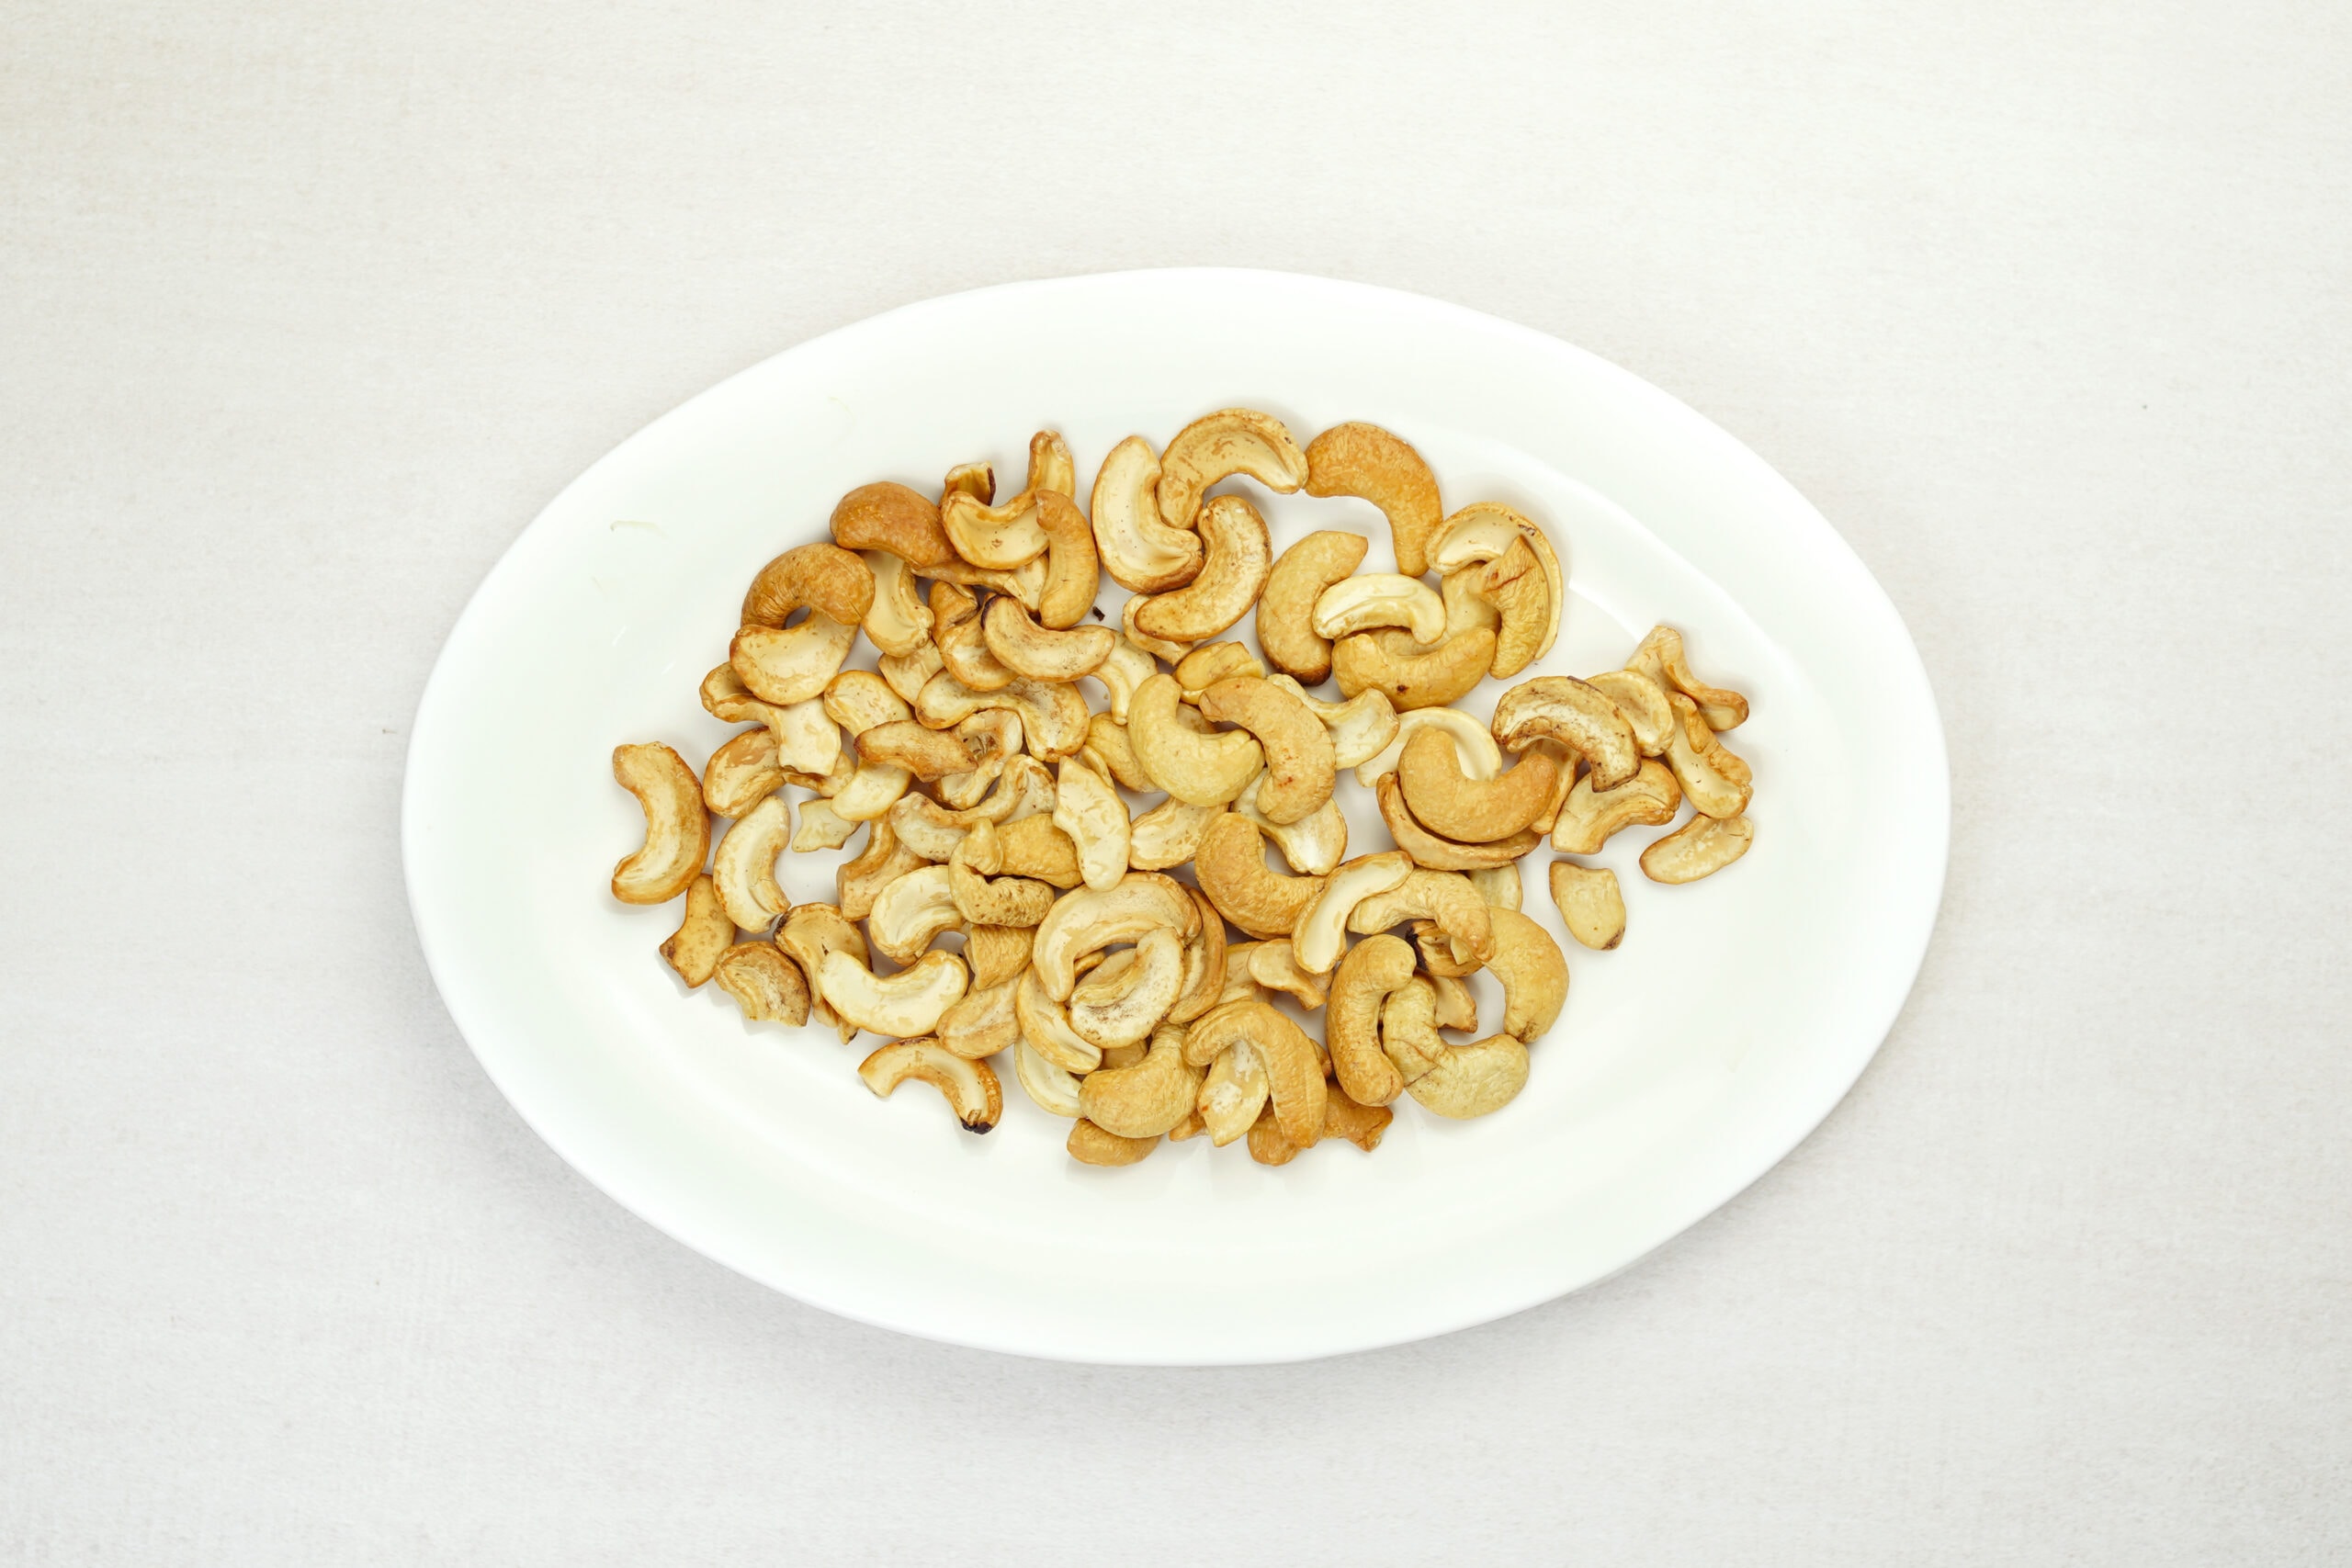 Roasted cashew nuts on white plate